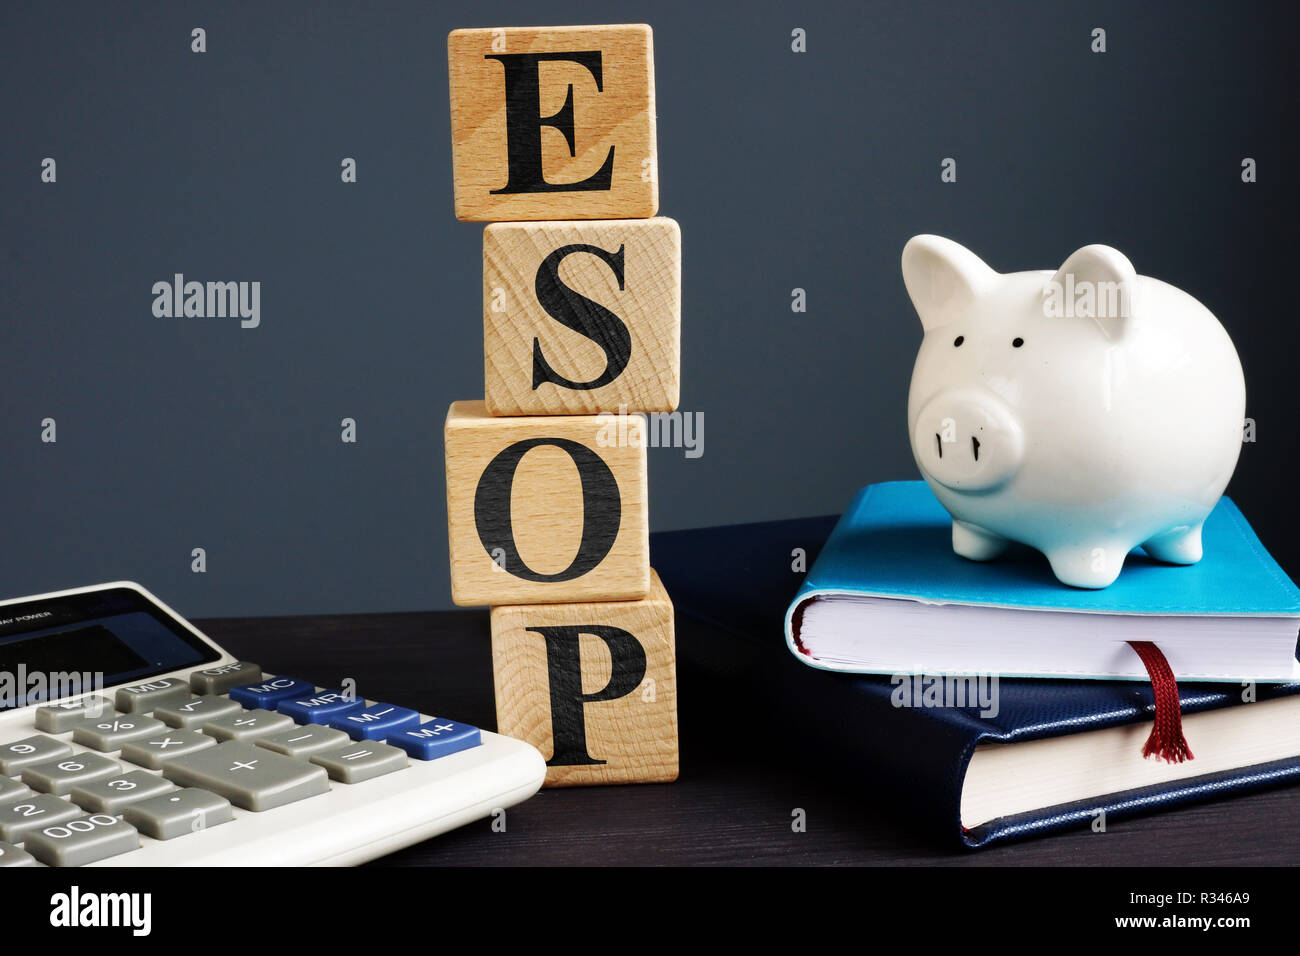 ESOP employee stock ownership plans. Cubes with letters. Stock Photo